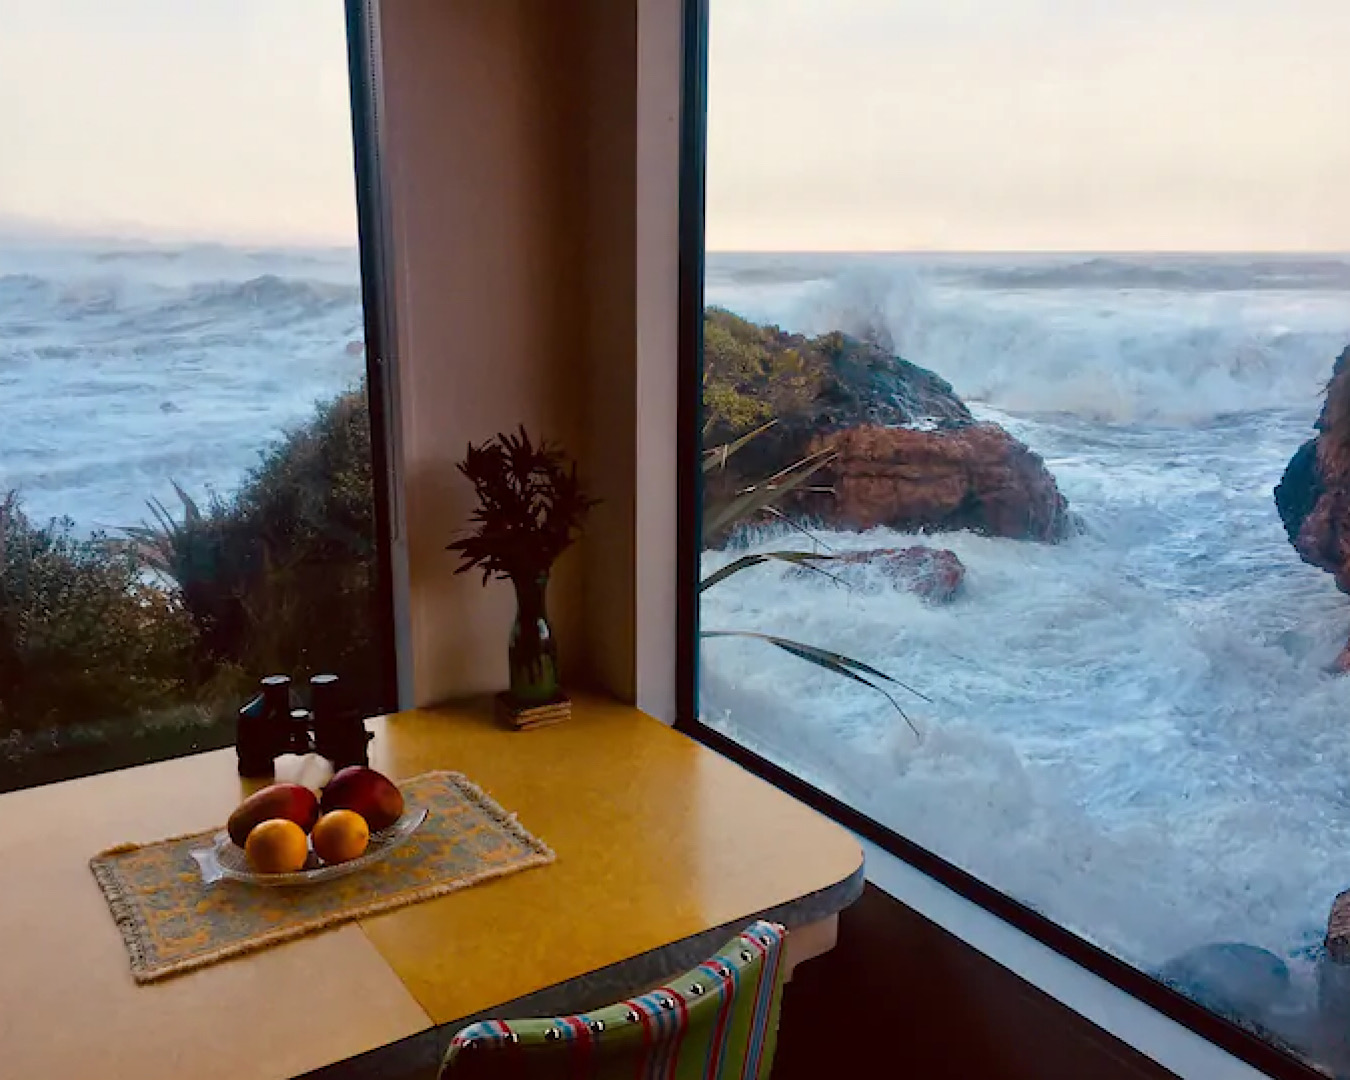 A dining table sits in the corner of a bach and, outside the window, the ocean laps.